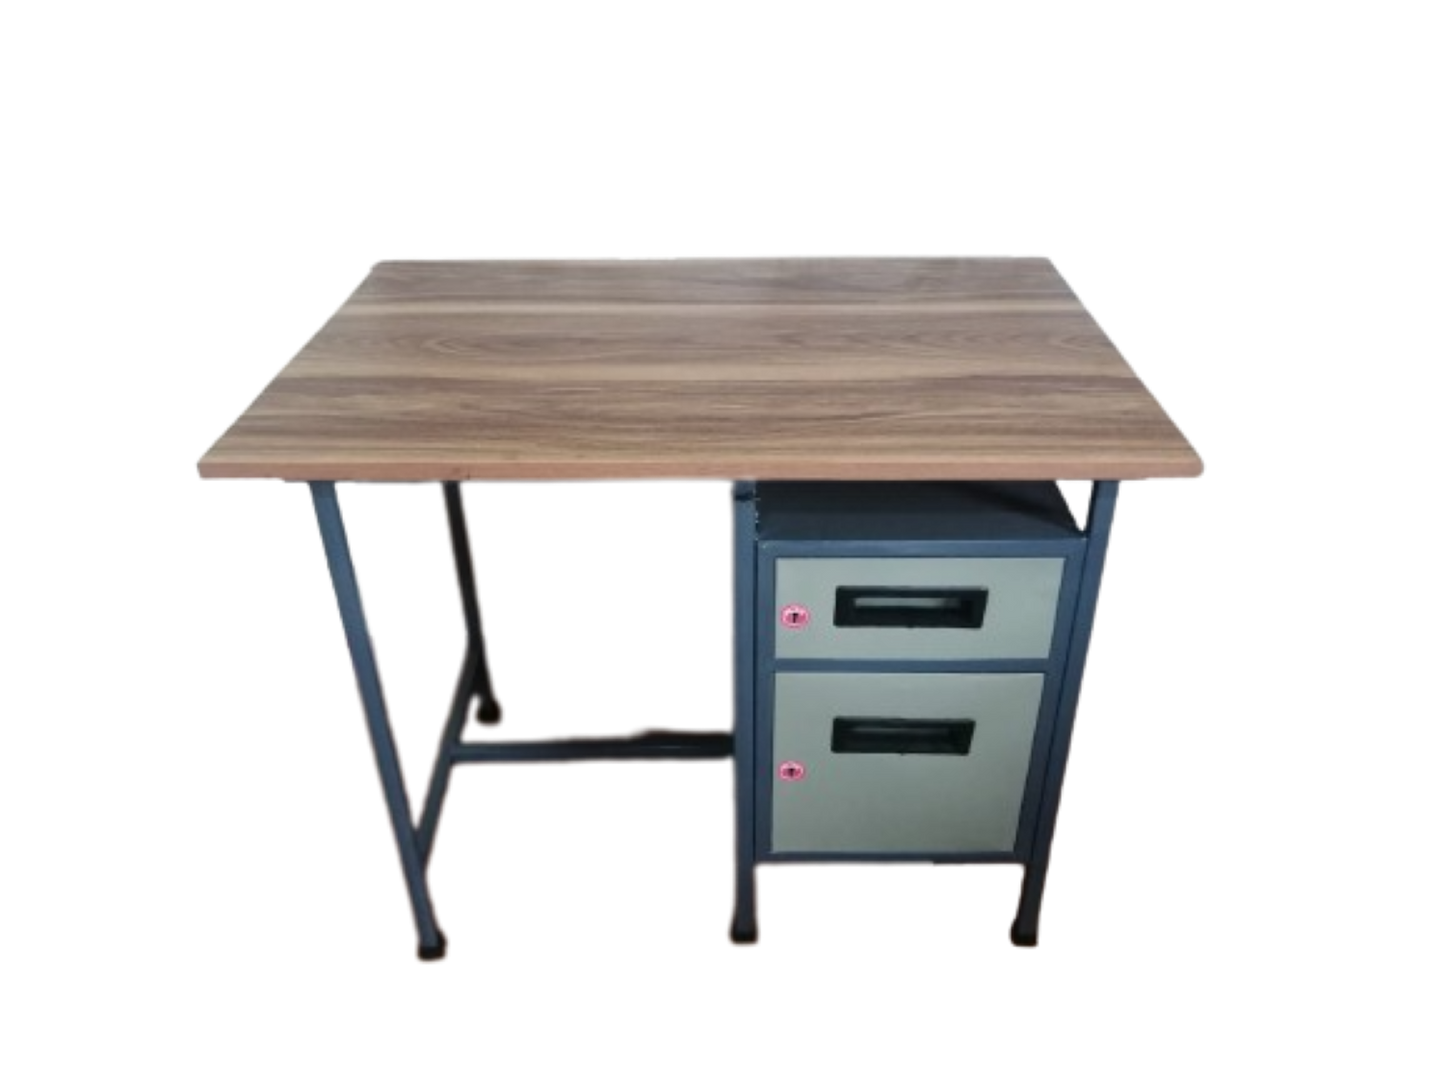 Bowzar Office Table 3X2 Feet Metal Frame Wooden Top With Drawer